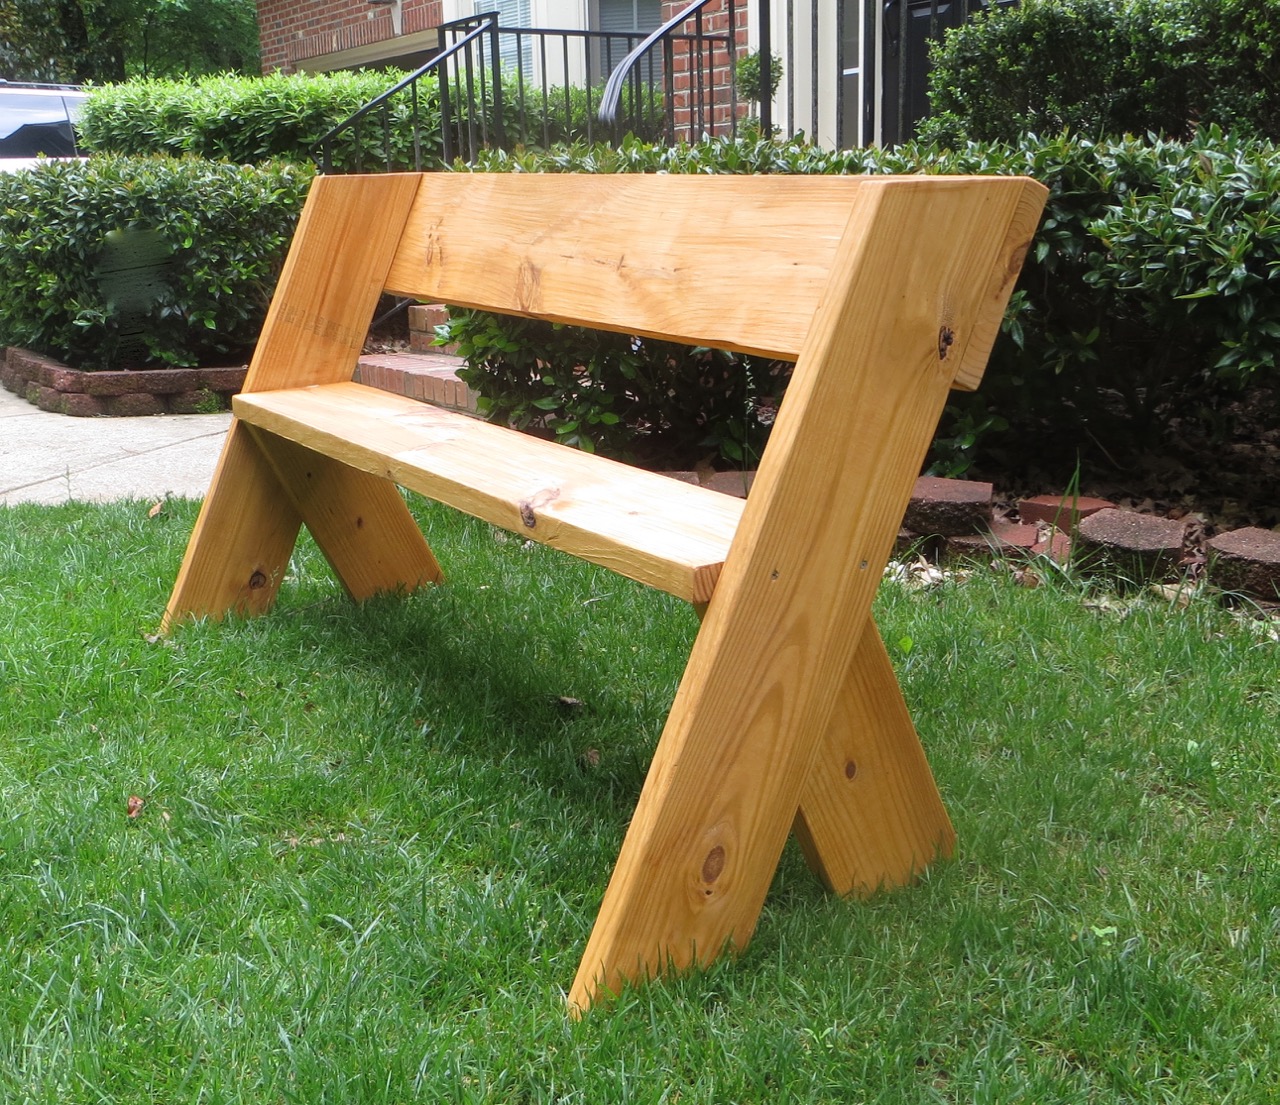 DIY Tutorial - $16 Simple Outdoor Wood Bench The Project 